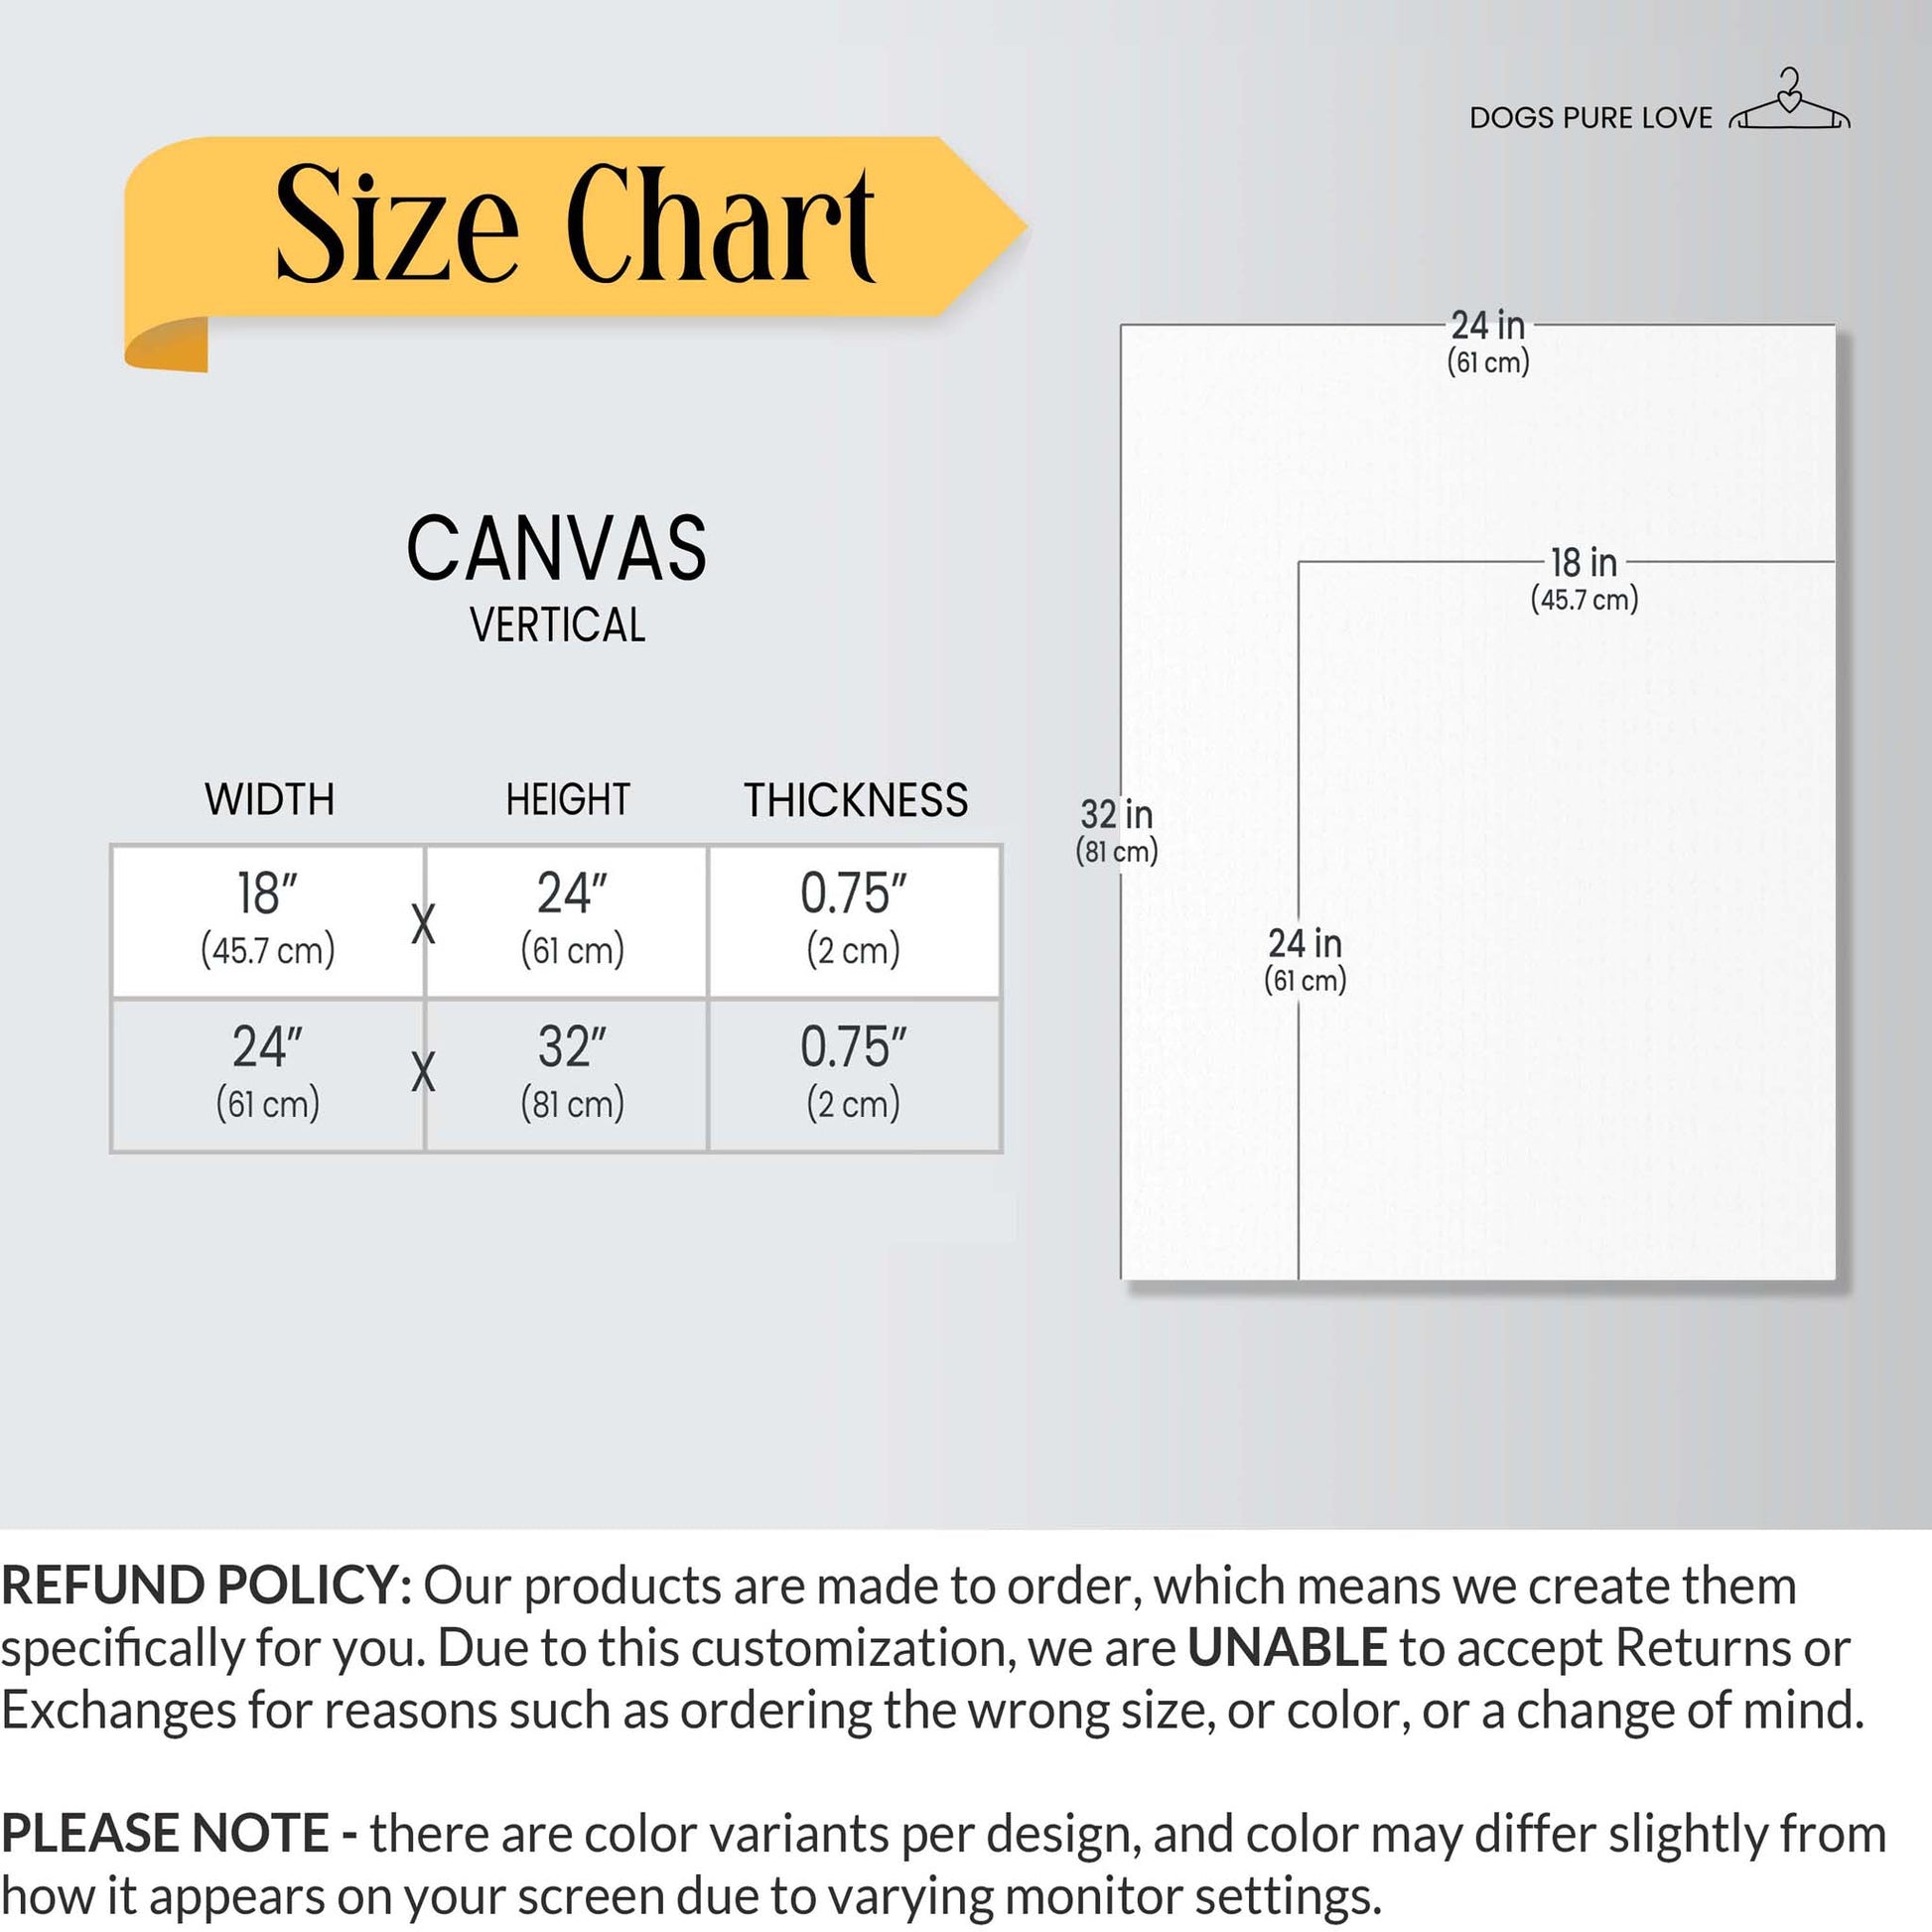 Dogs Pure Love Canvas Size Chart displaying measurements and Refund Policy.